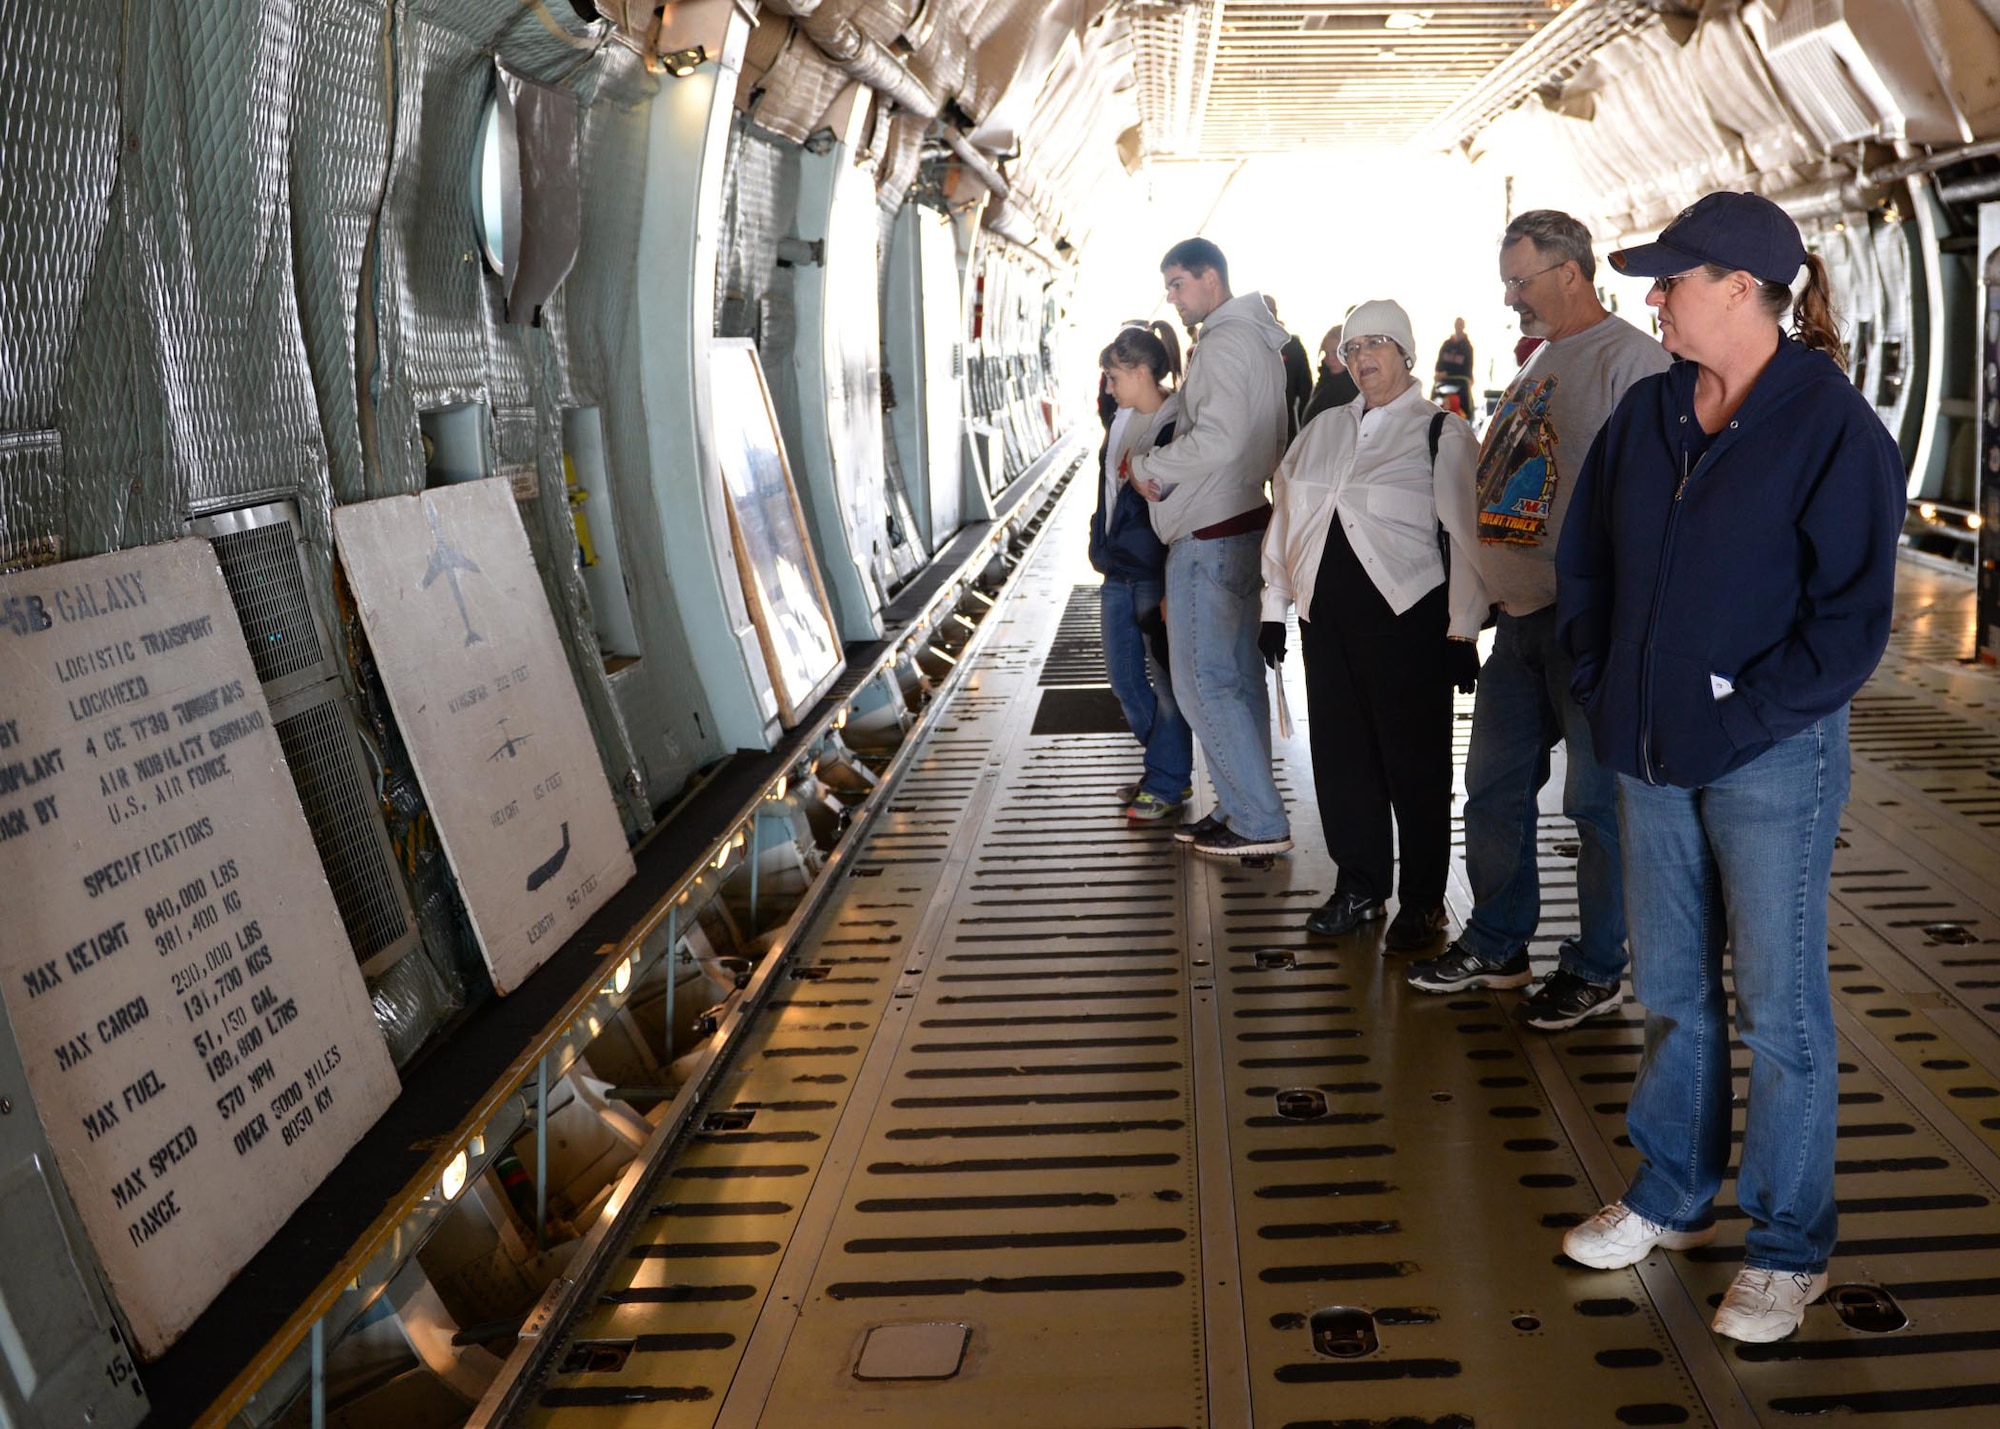 ALTUS AIR FORCE BASE, Okla. – Visitors walk inside a U.S. Air Force C-5 Galaxy cargo aircraft during the 2014 Wings of Freedom Open House, Sept. 13, 2014. The open house, headlined by the U.S. Air Force Thunderbirds, highlighted various aerial demonstrations and static displays for the public free of charge. This is the first time Altus AFB has opened its gates to the public since 2012. (U.S. Air Force photo by Senior Airman Levin Boland/Released) 